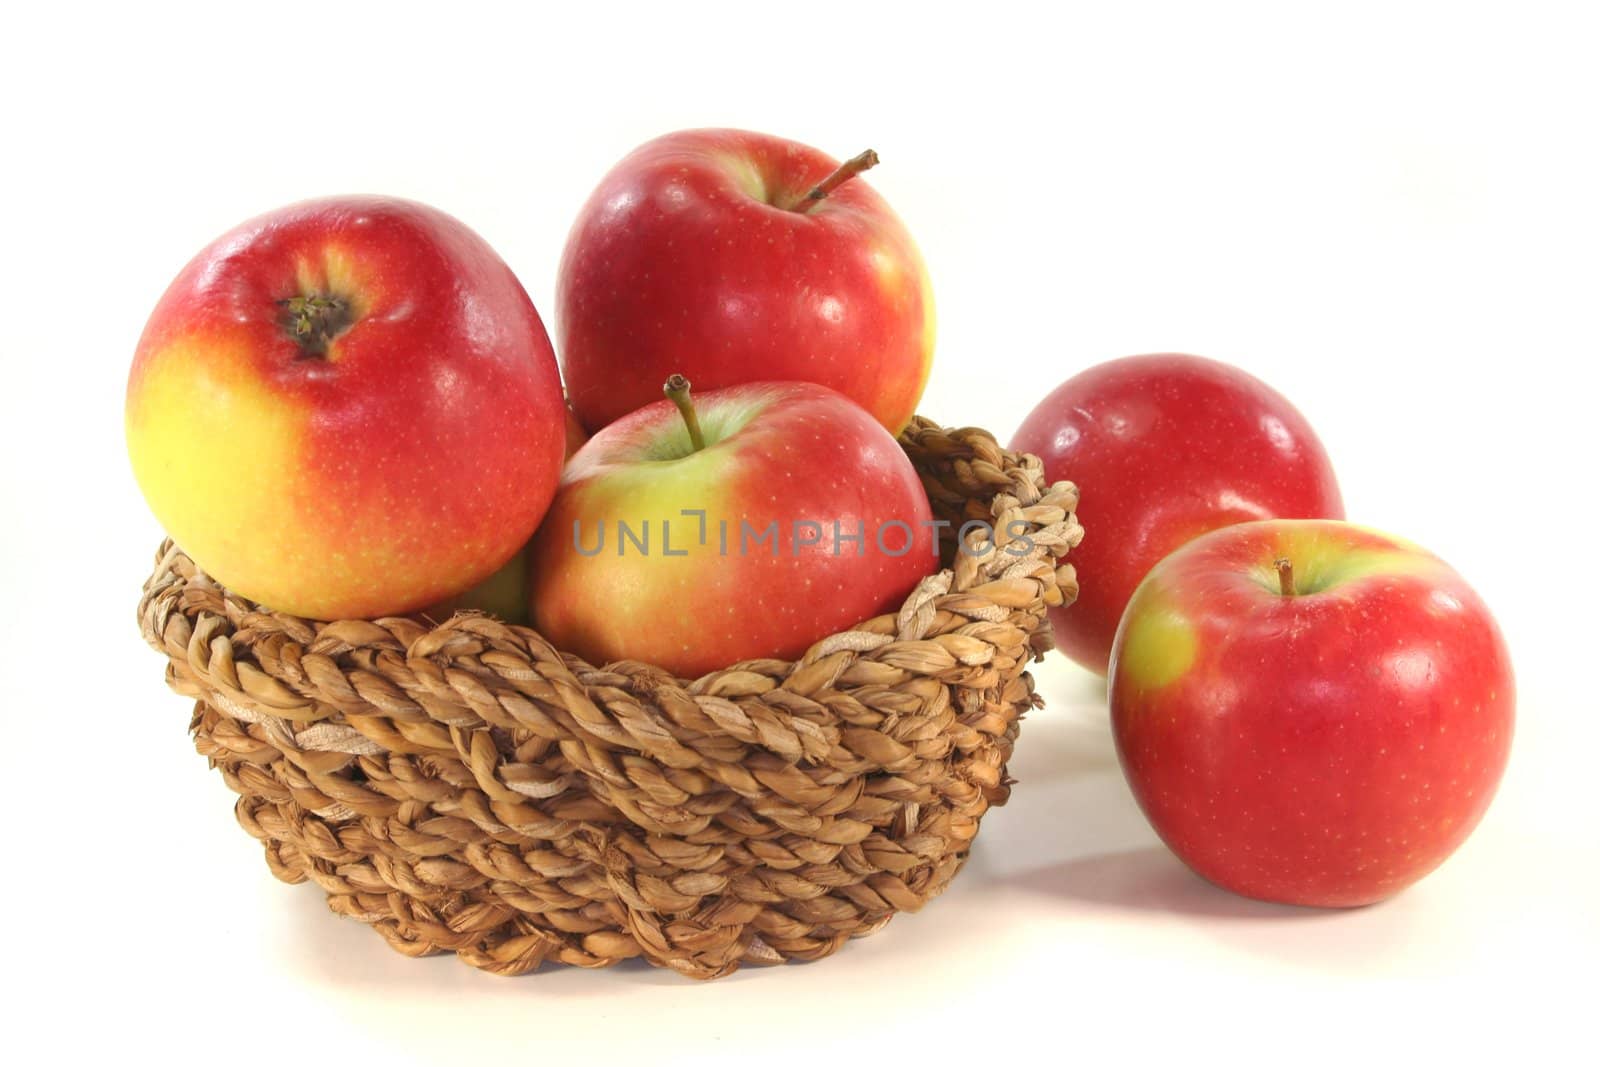 Apples in the basket by discovery